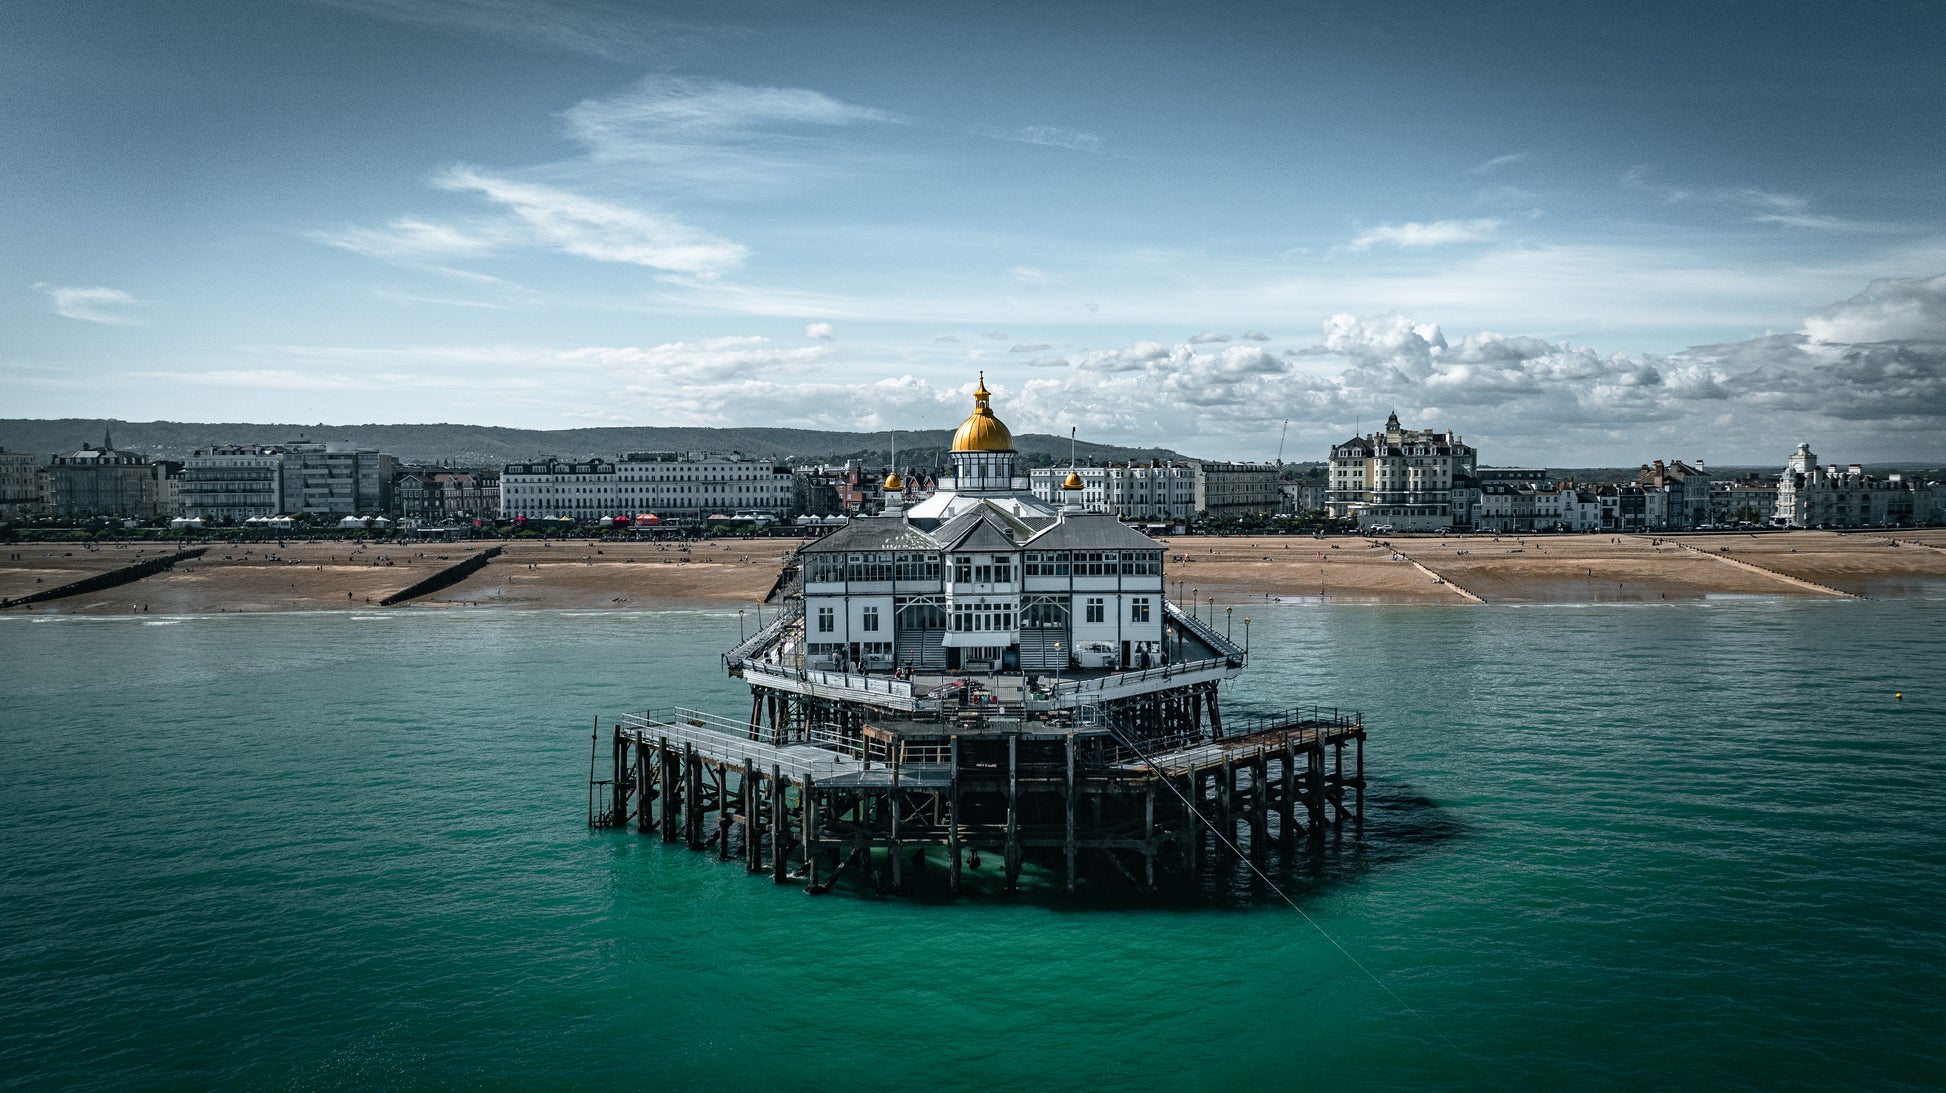 Eastbourne Pier and sunny beach, East Sussex, UK. Wall decor, unframed print